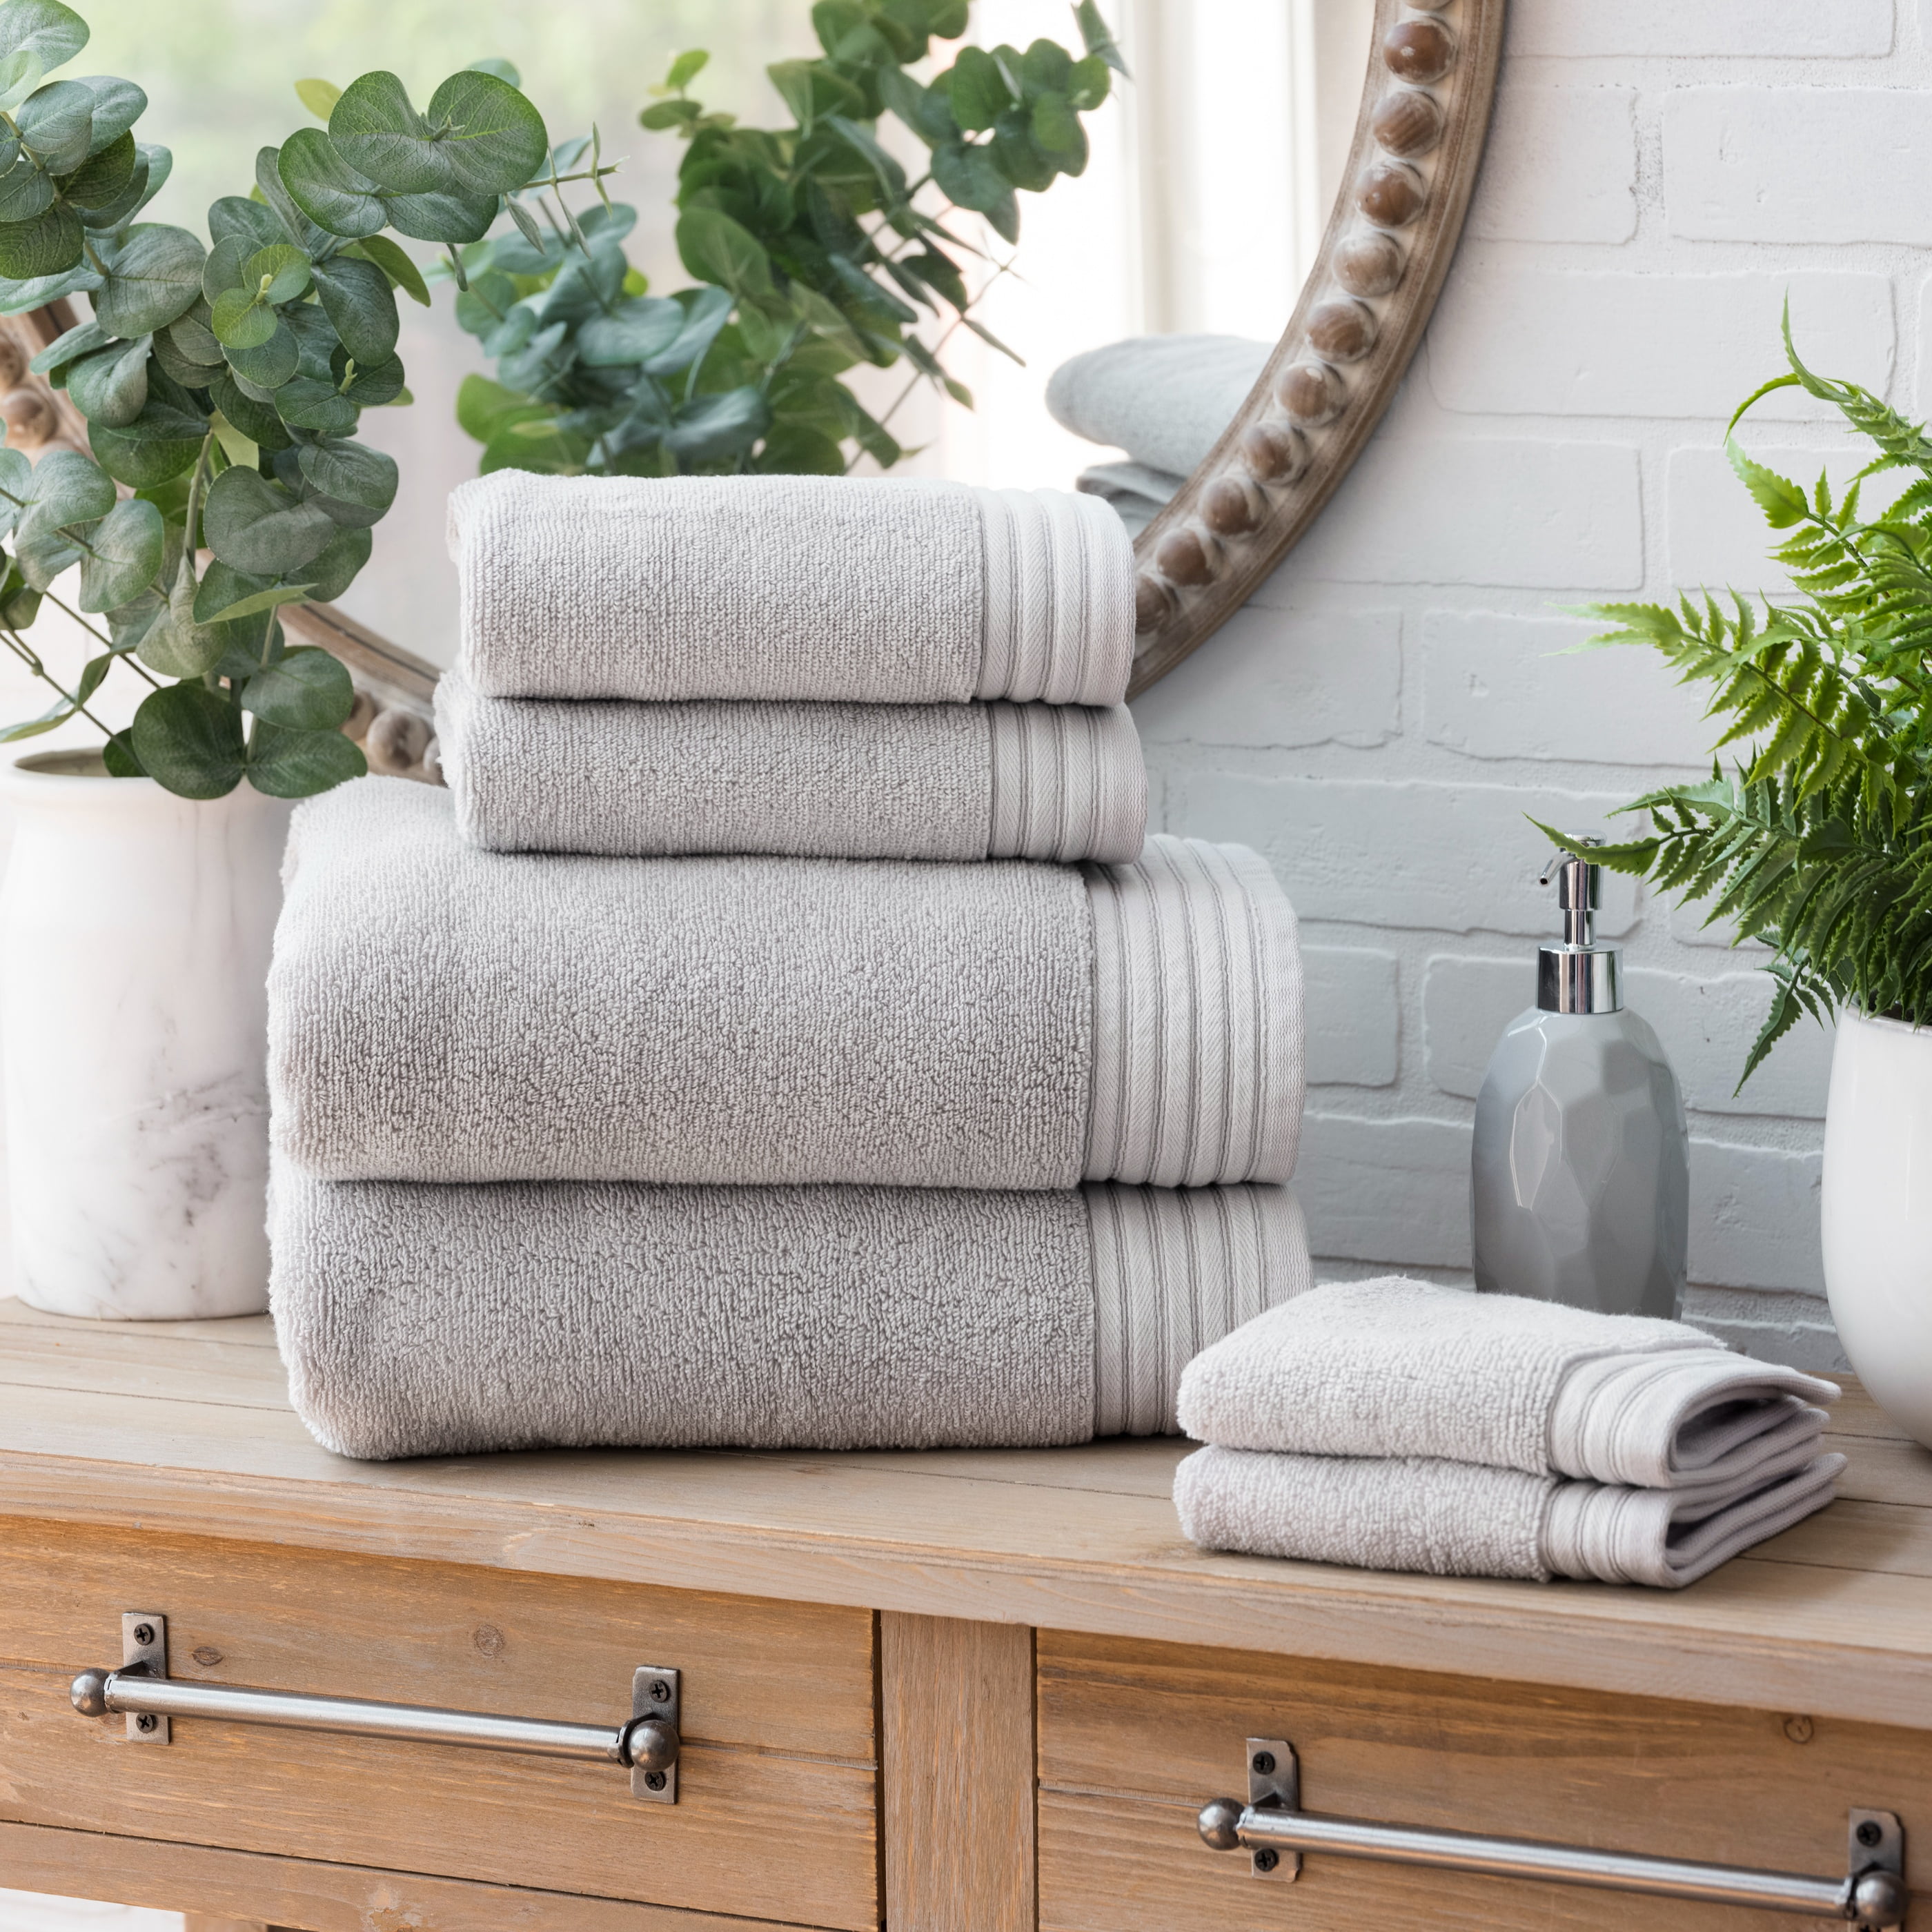 Best Bath Towels 2022, Guide to Buying Bath Towels: Fabrics, GSM and More